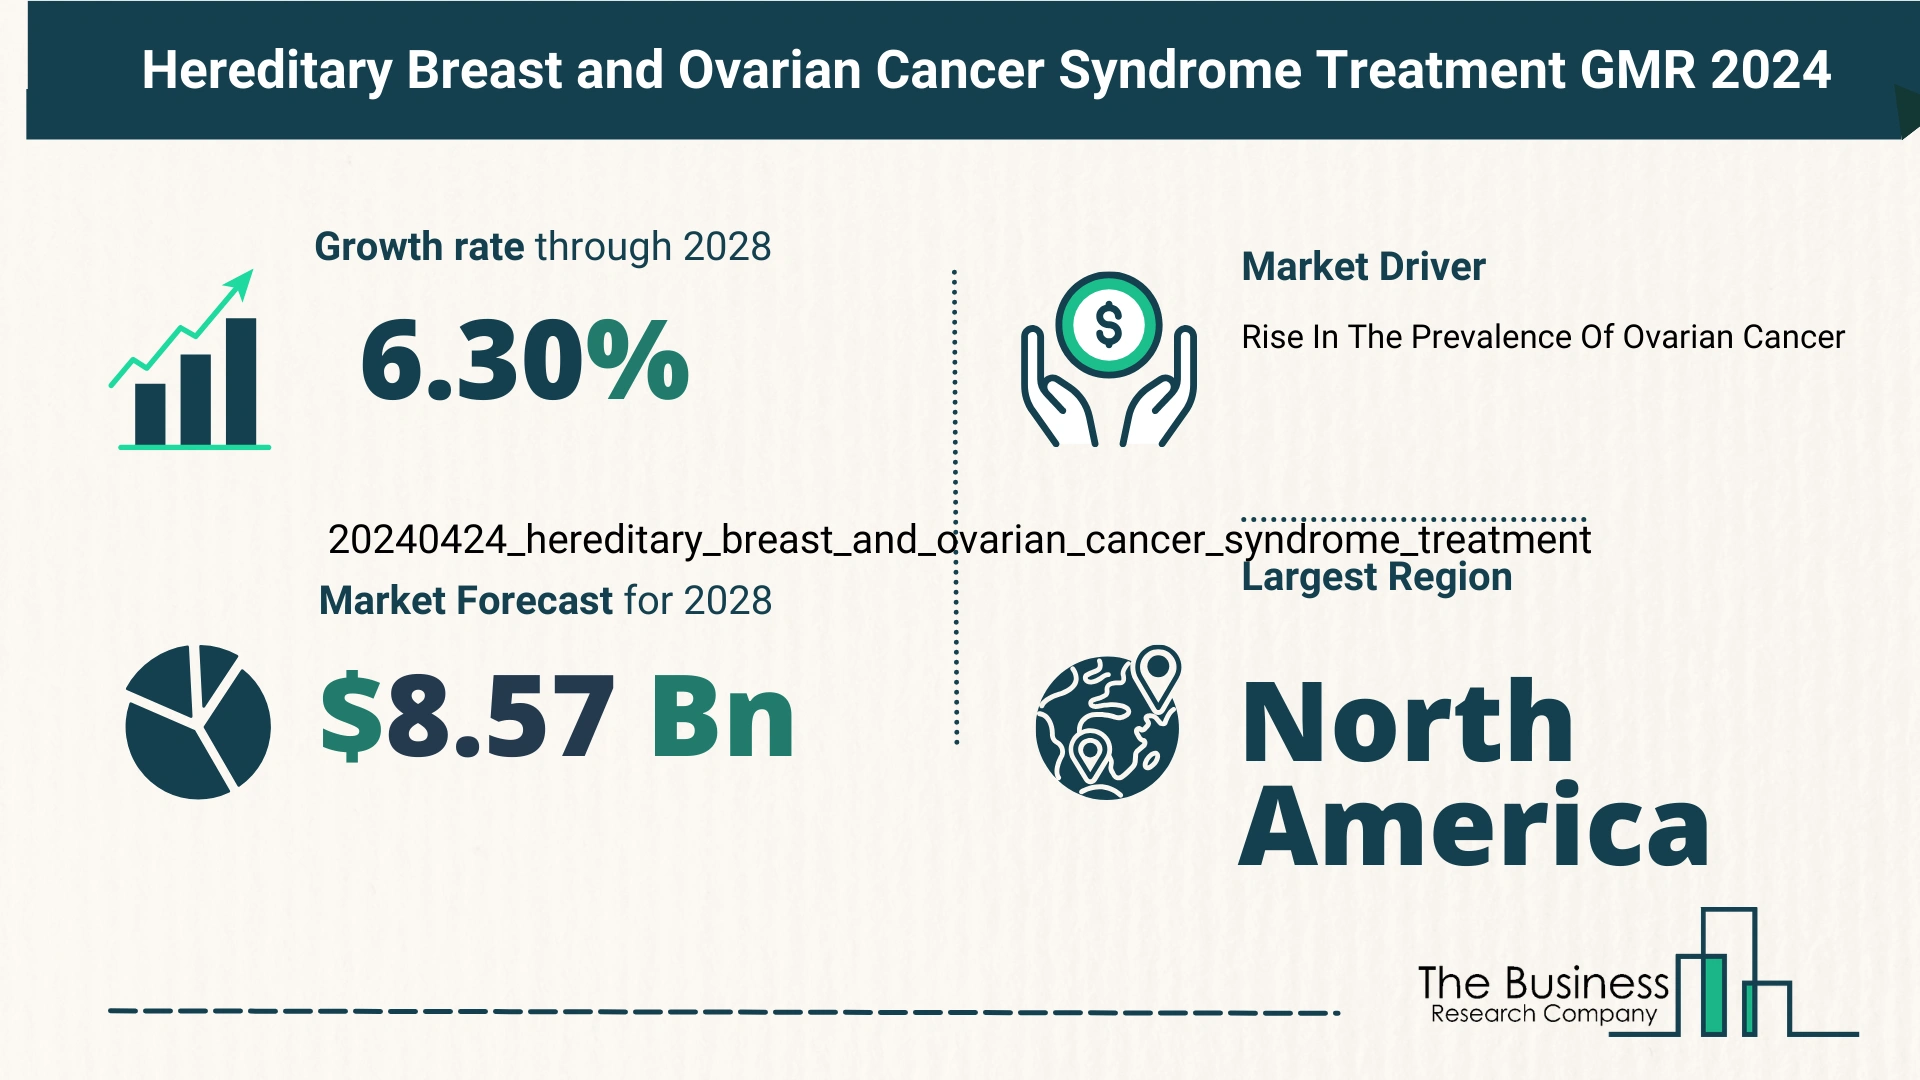 Global Hereditary Breast and Ovarian Cancer Syndrome Treatment Market Size